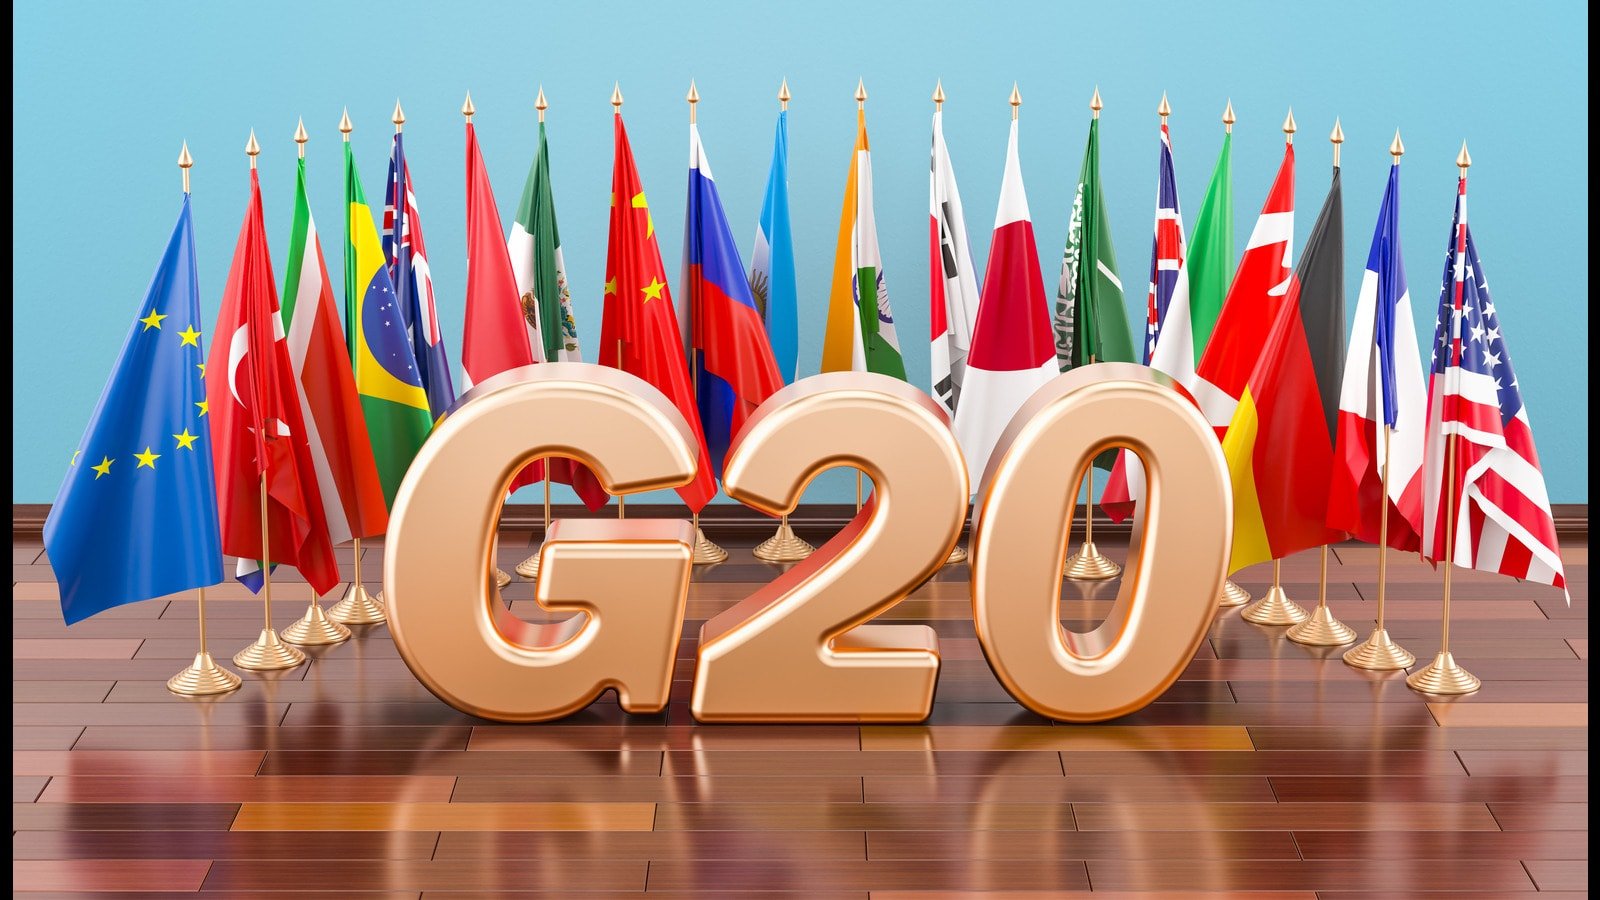 research work on g20